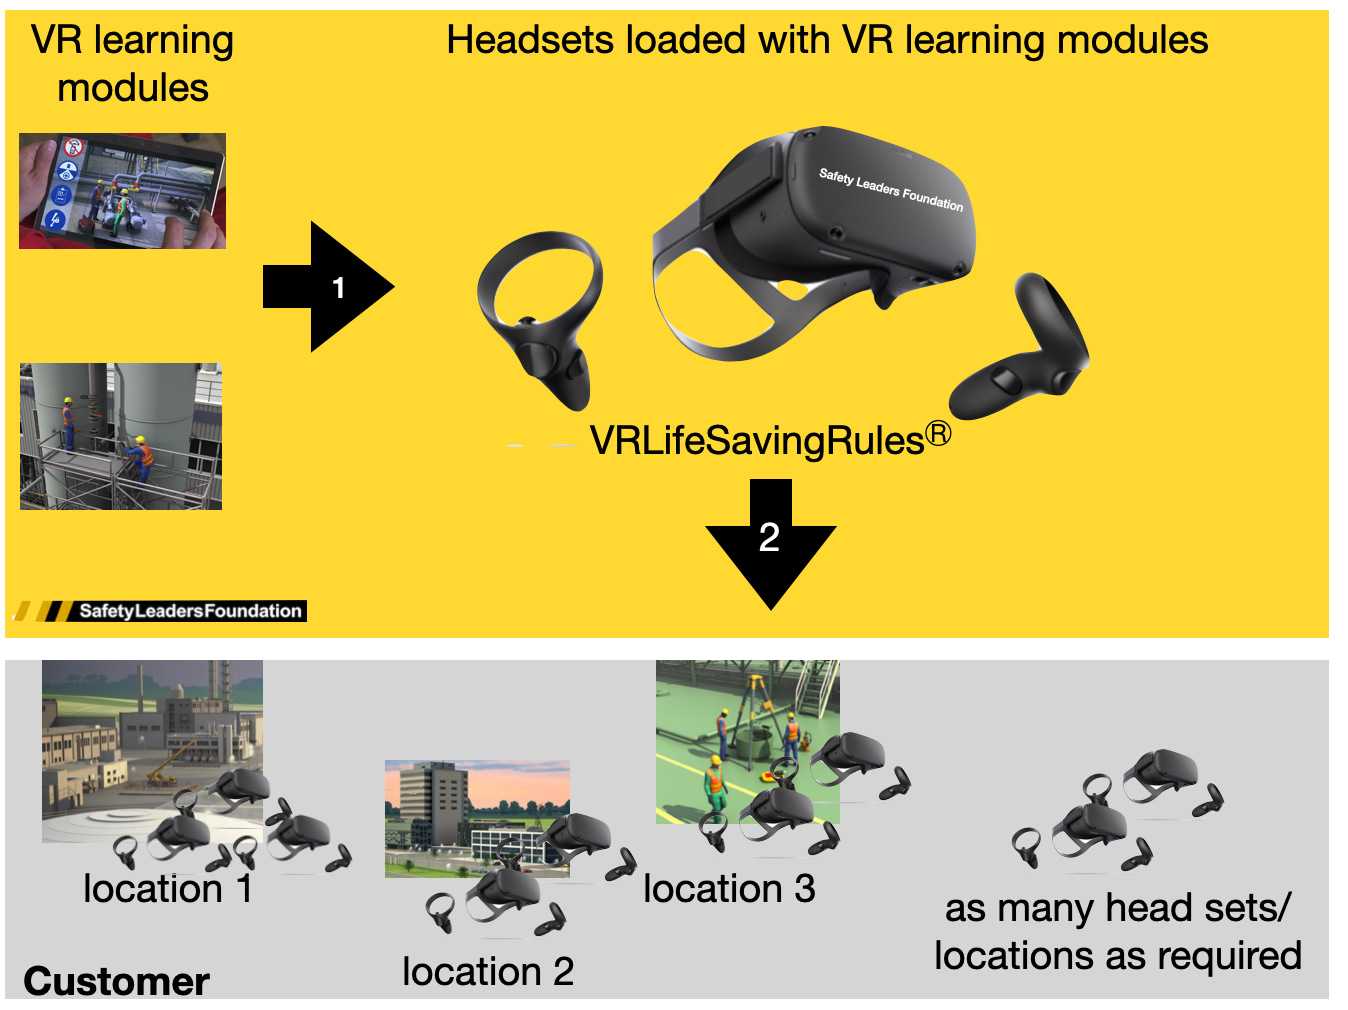 VR Learning Modules